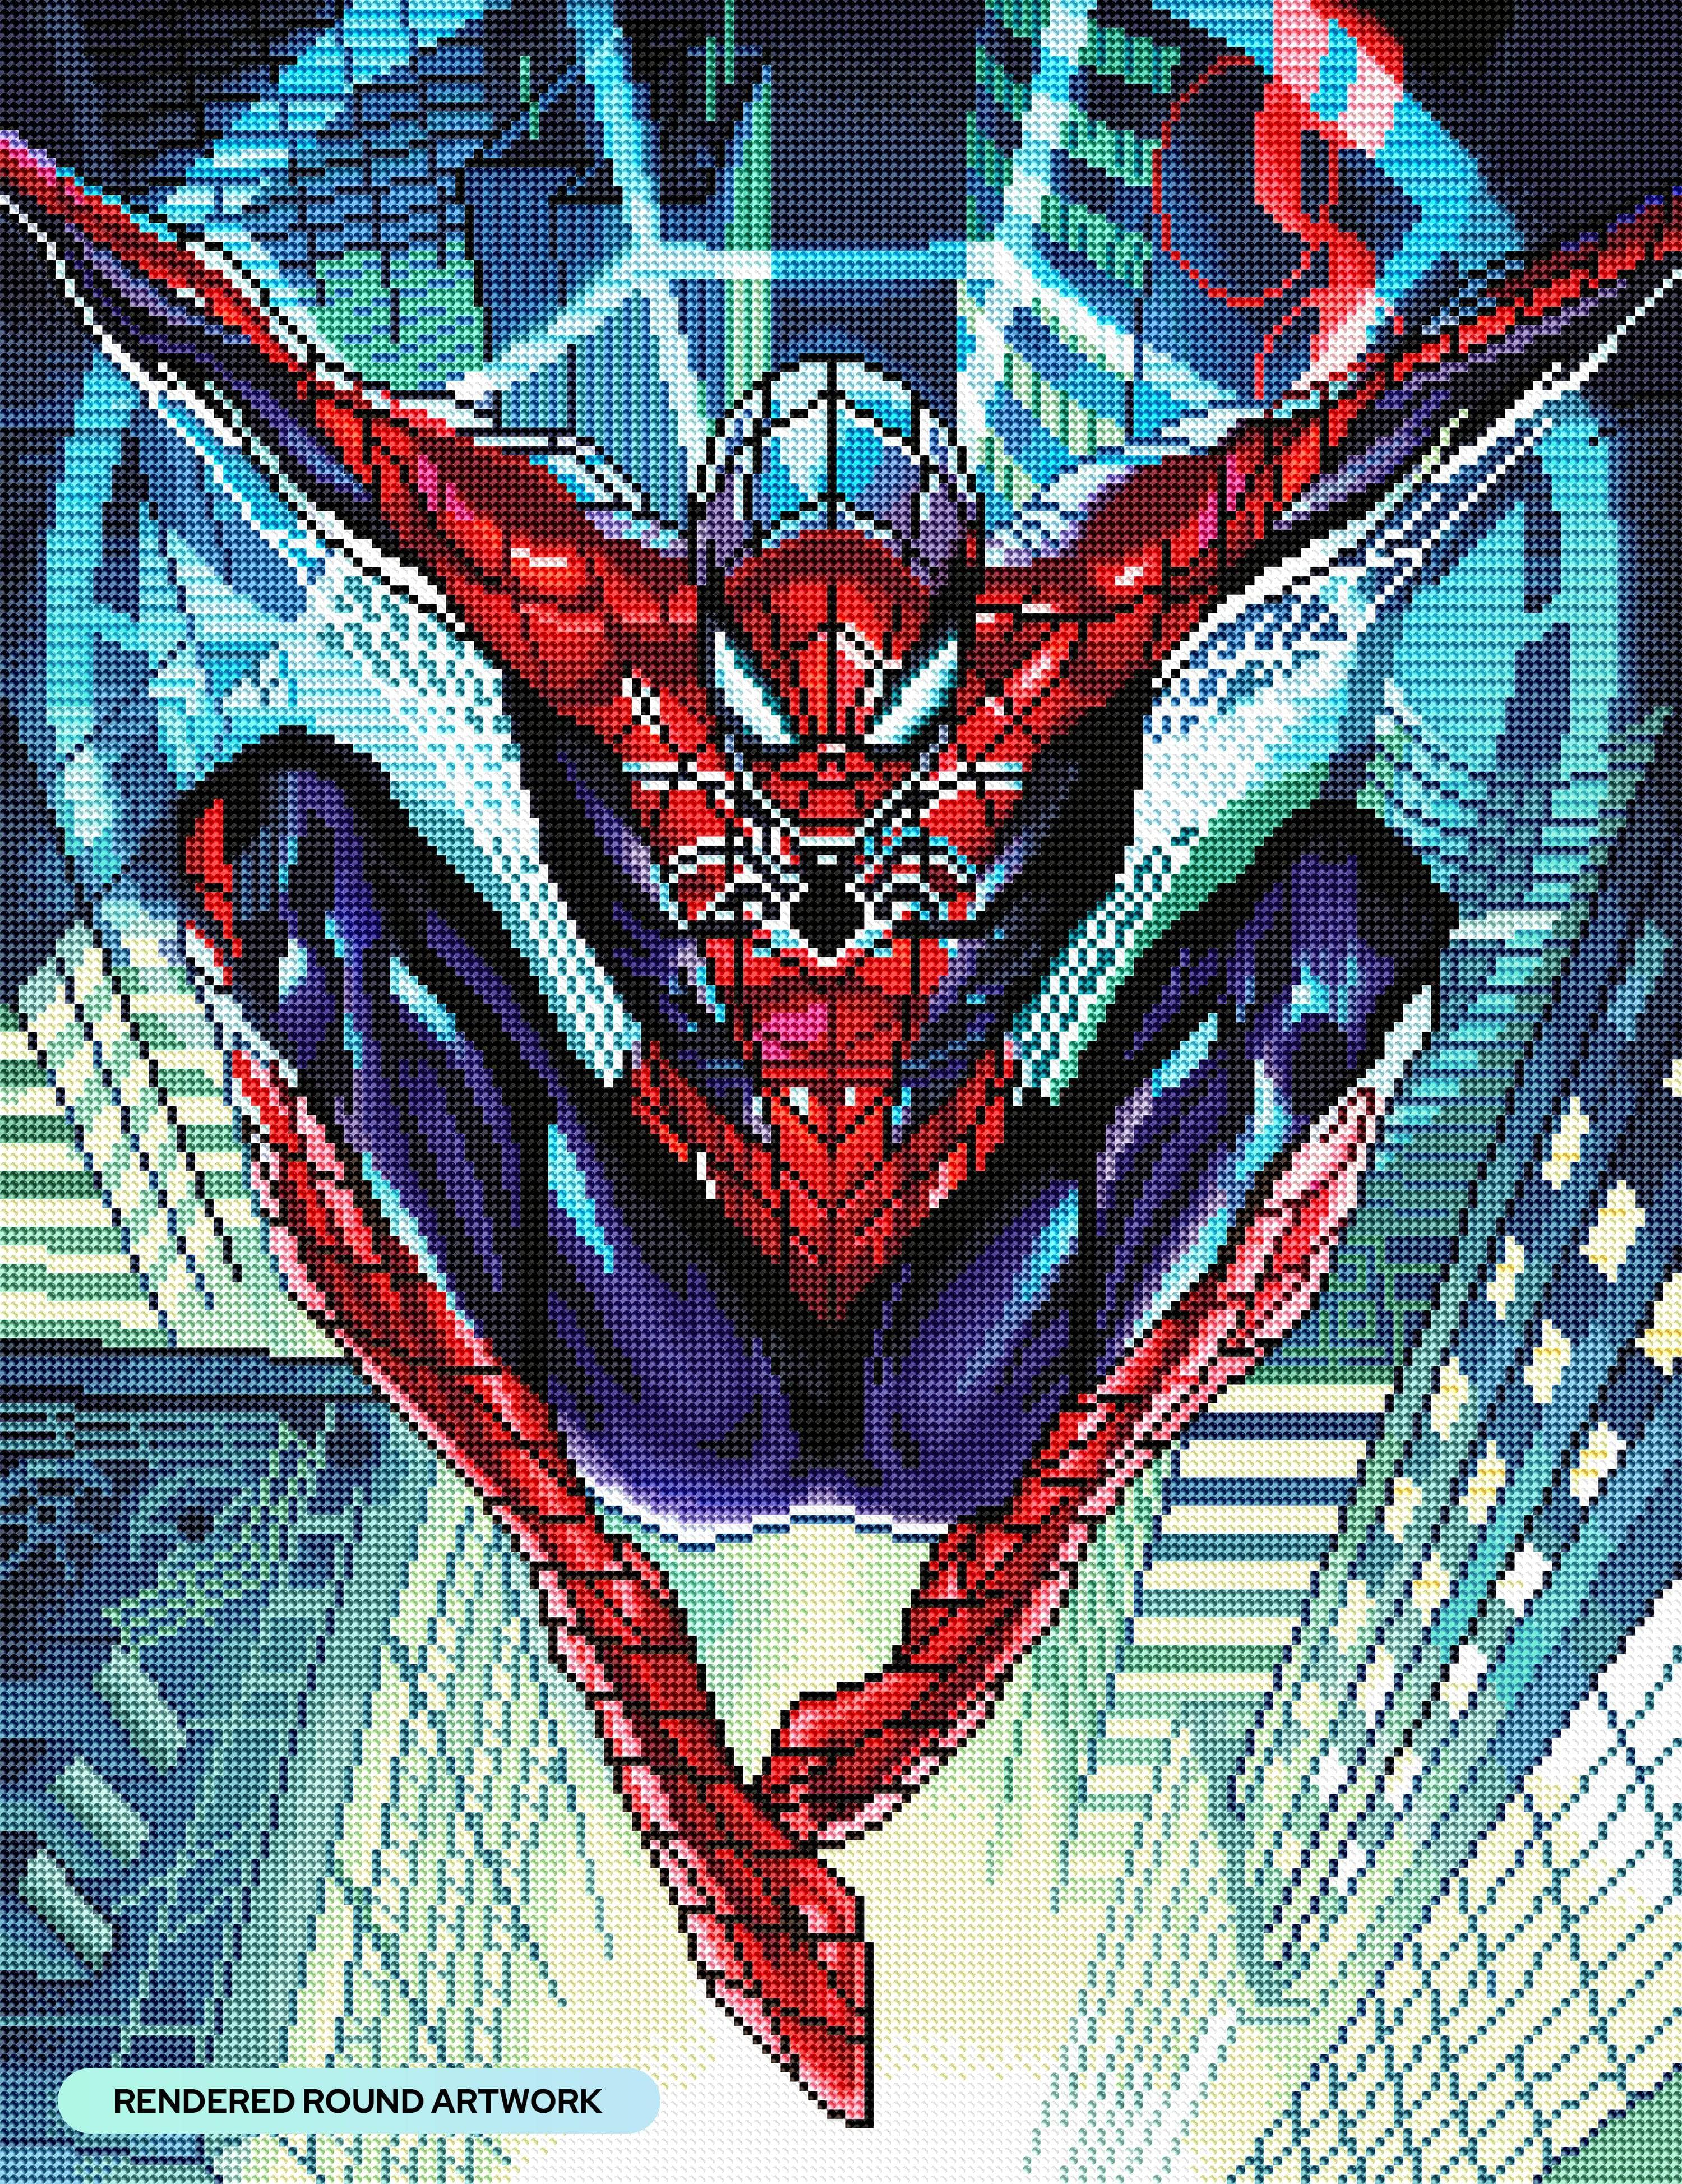 Spider-Man coloring book by MW Creativity And New Opportunities